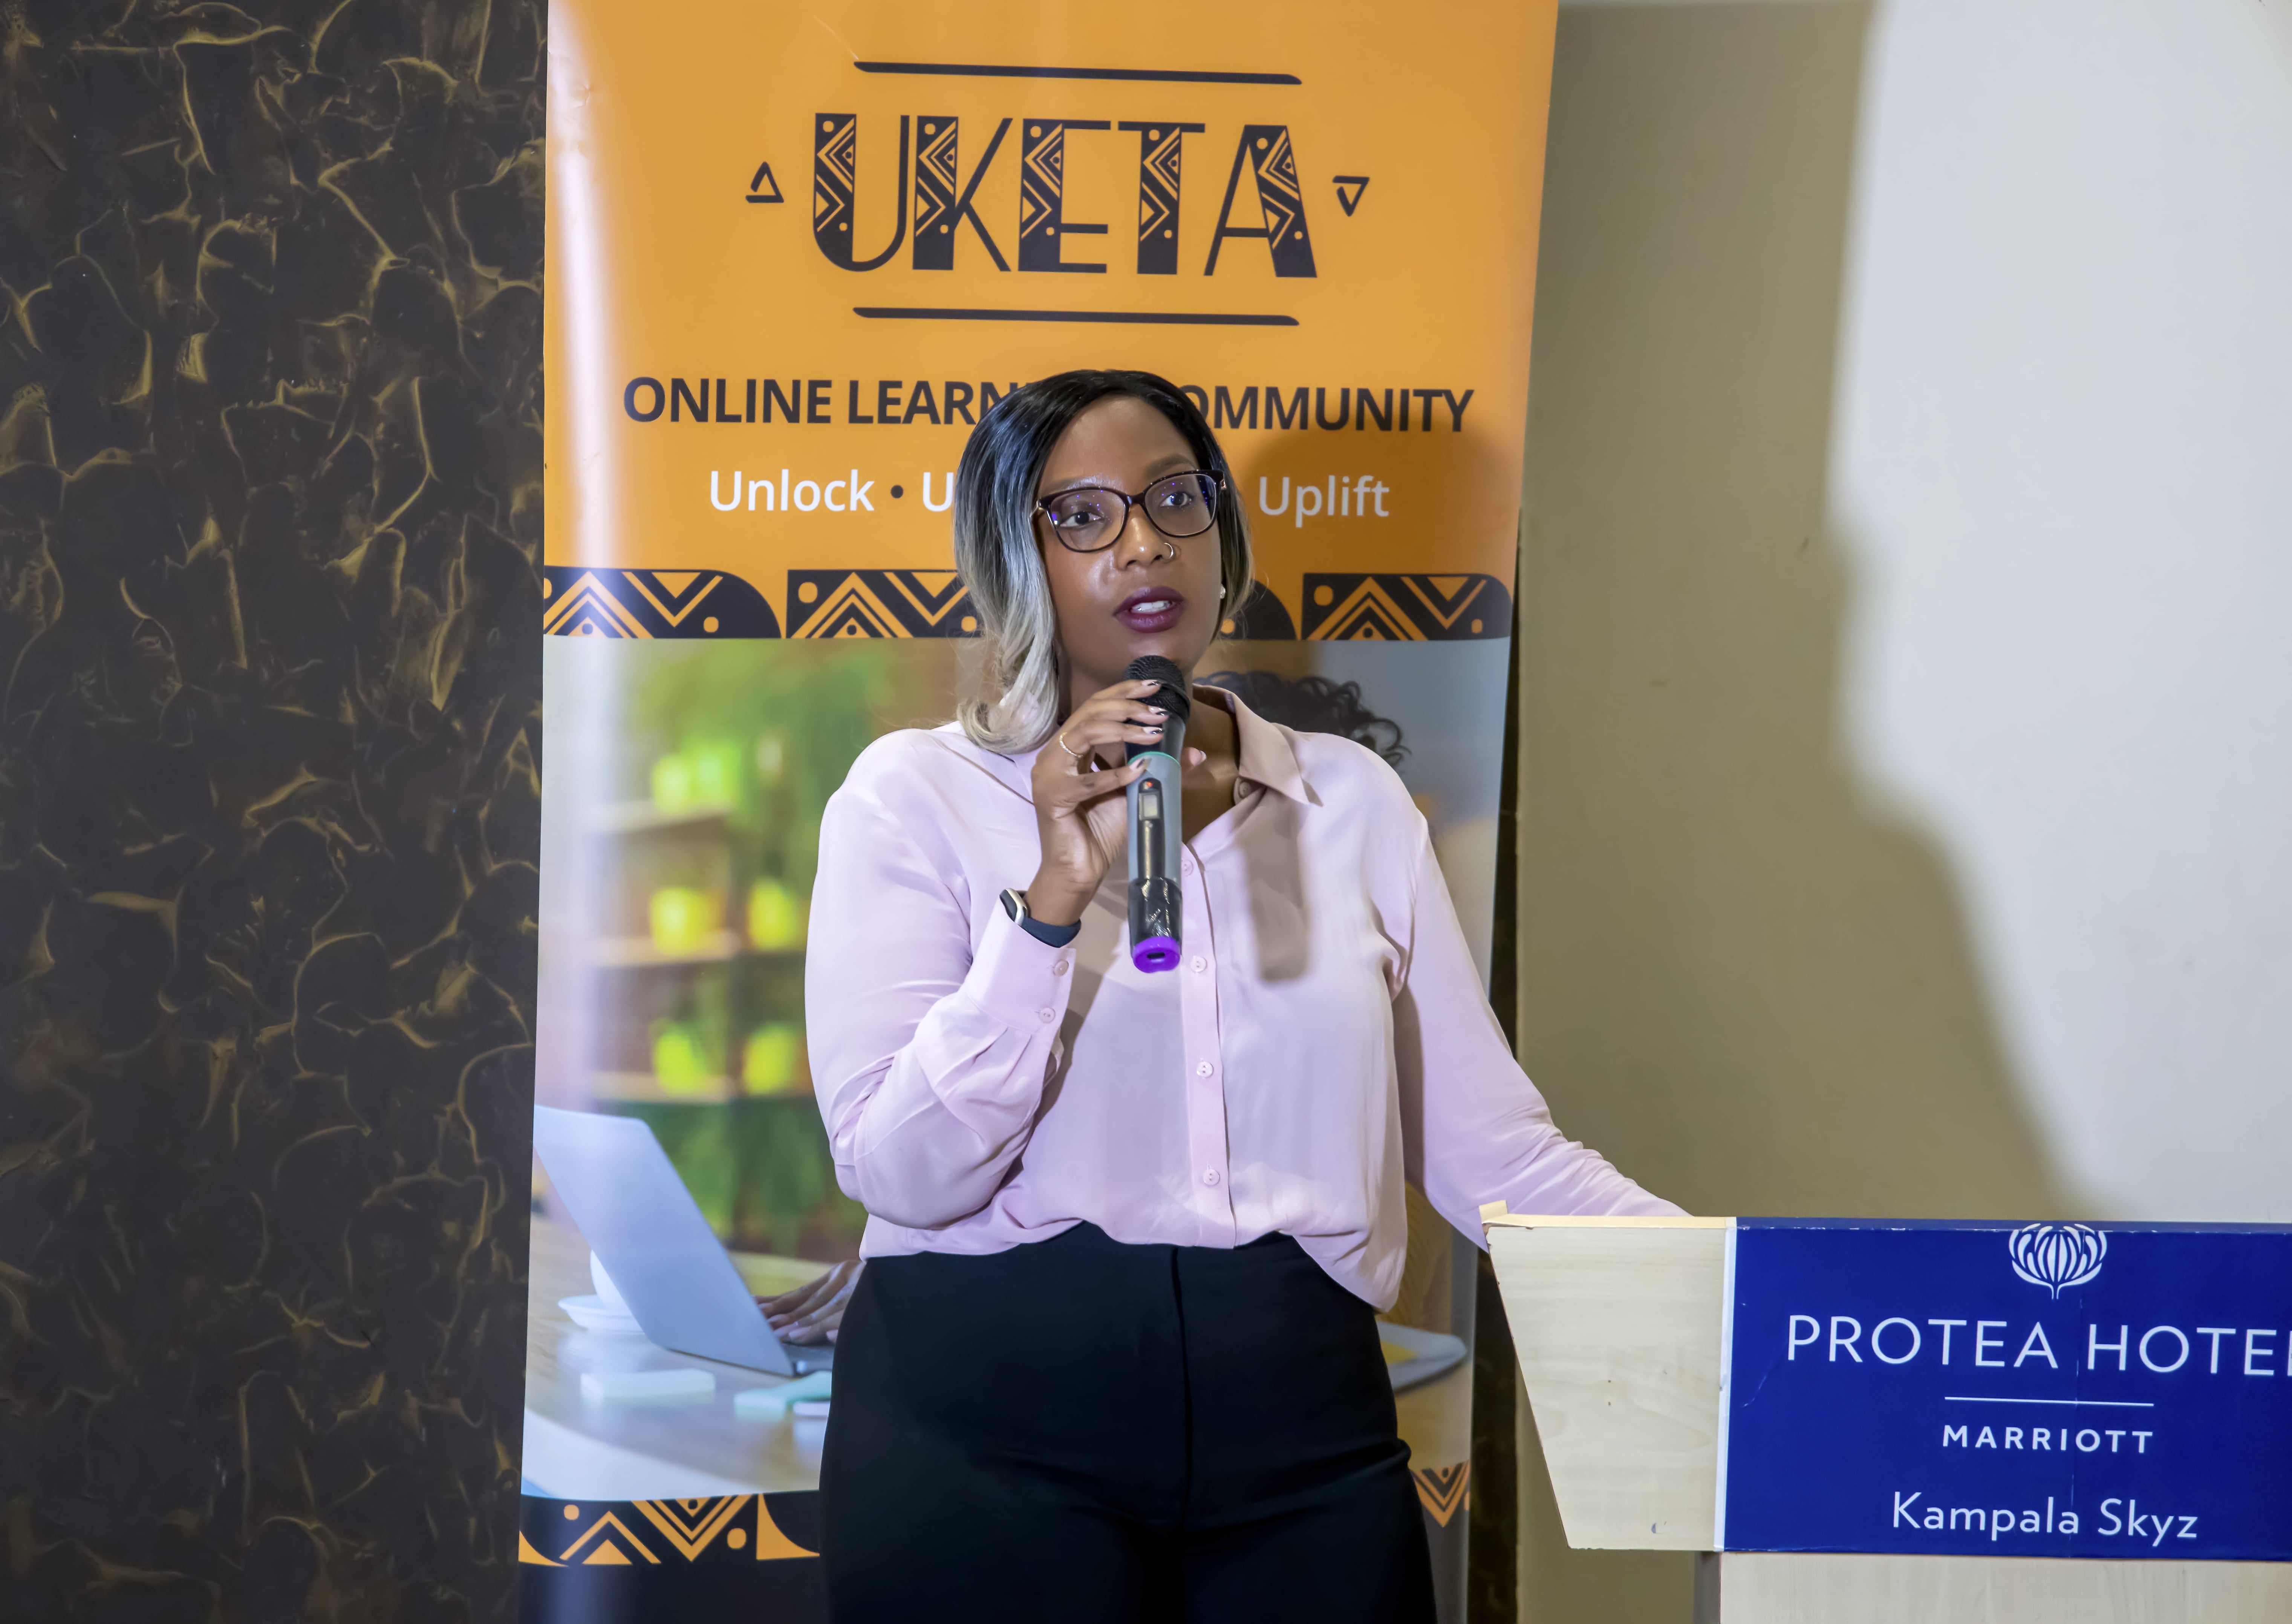 UKETA Launches Online Courses to Upskill Professionals and Empower Organizations Across East Africa